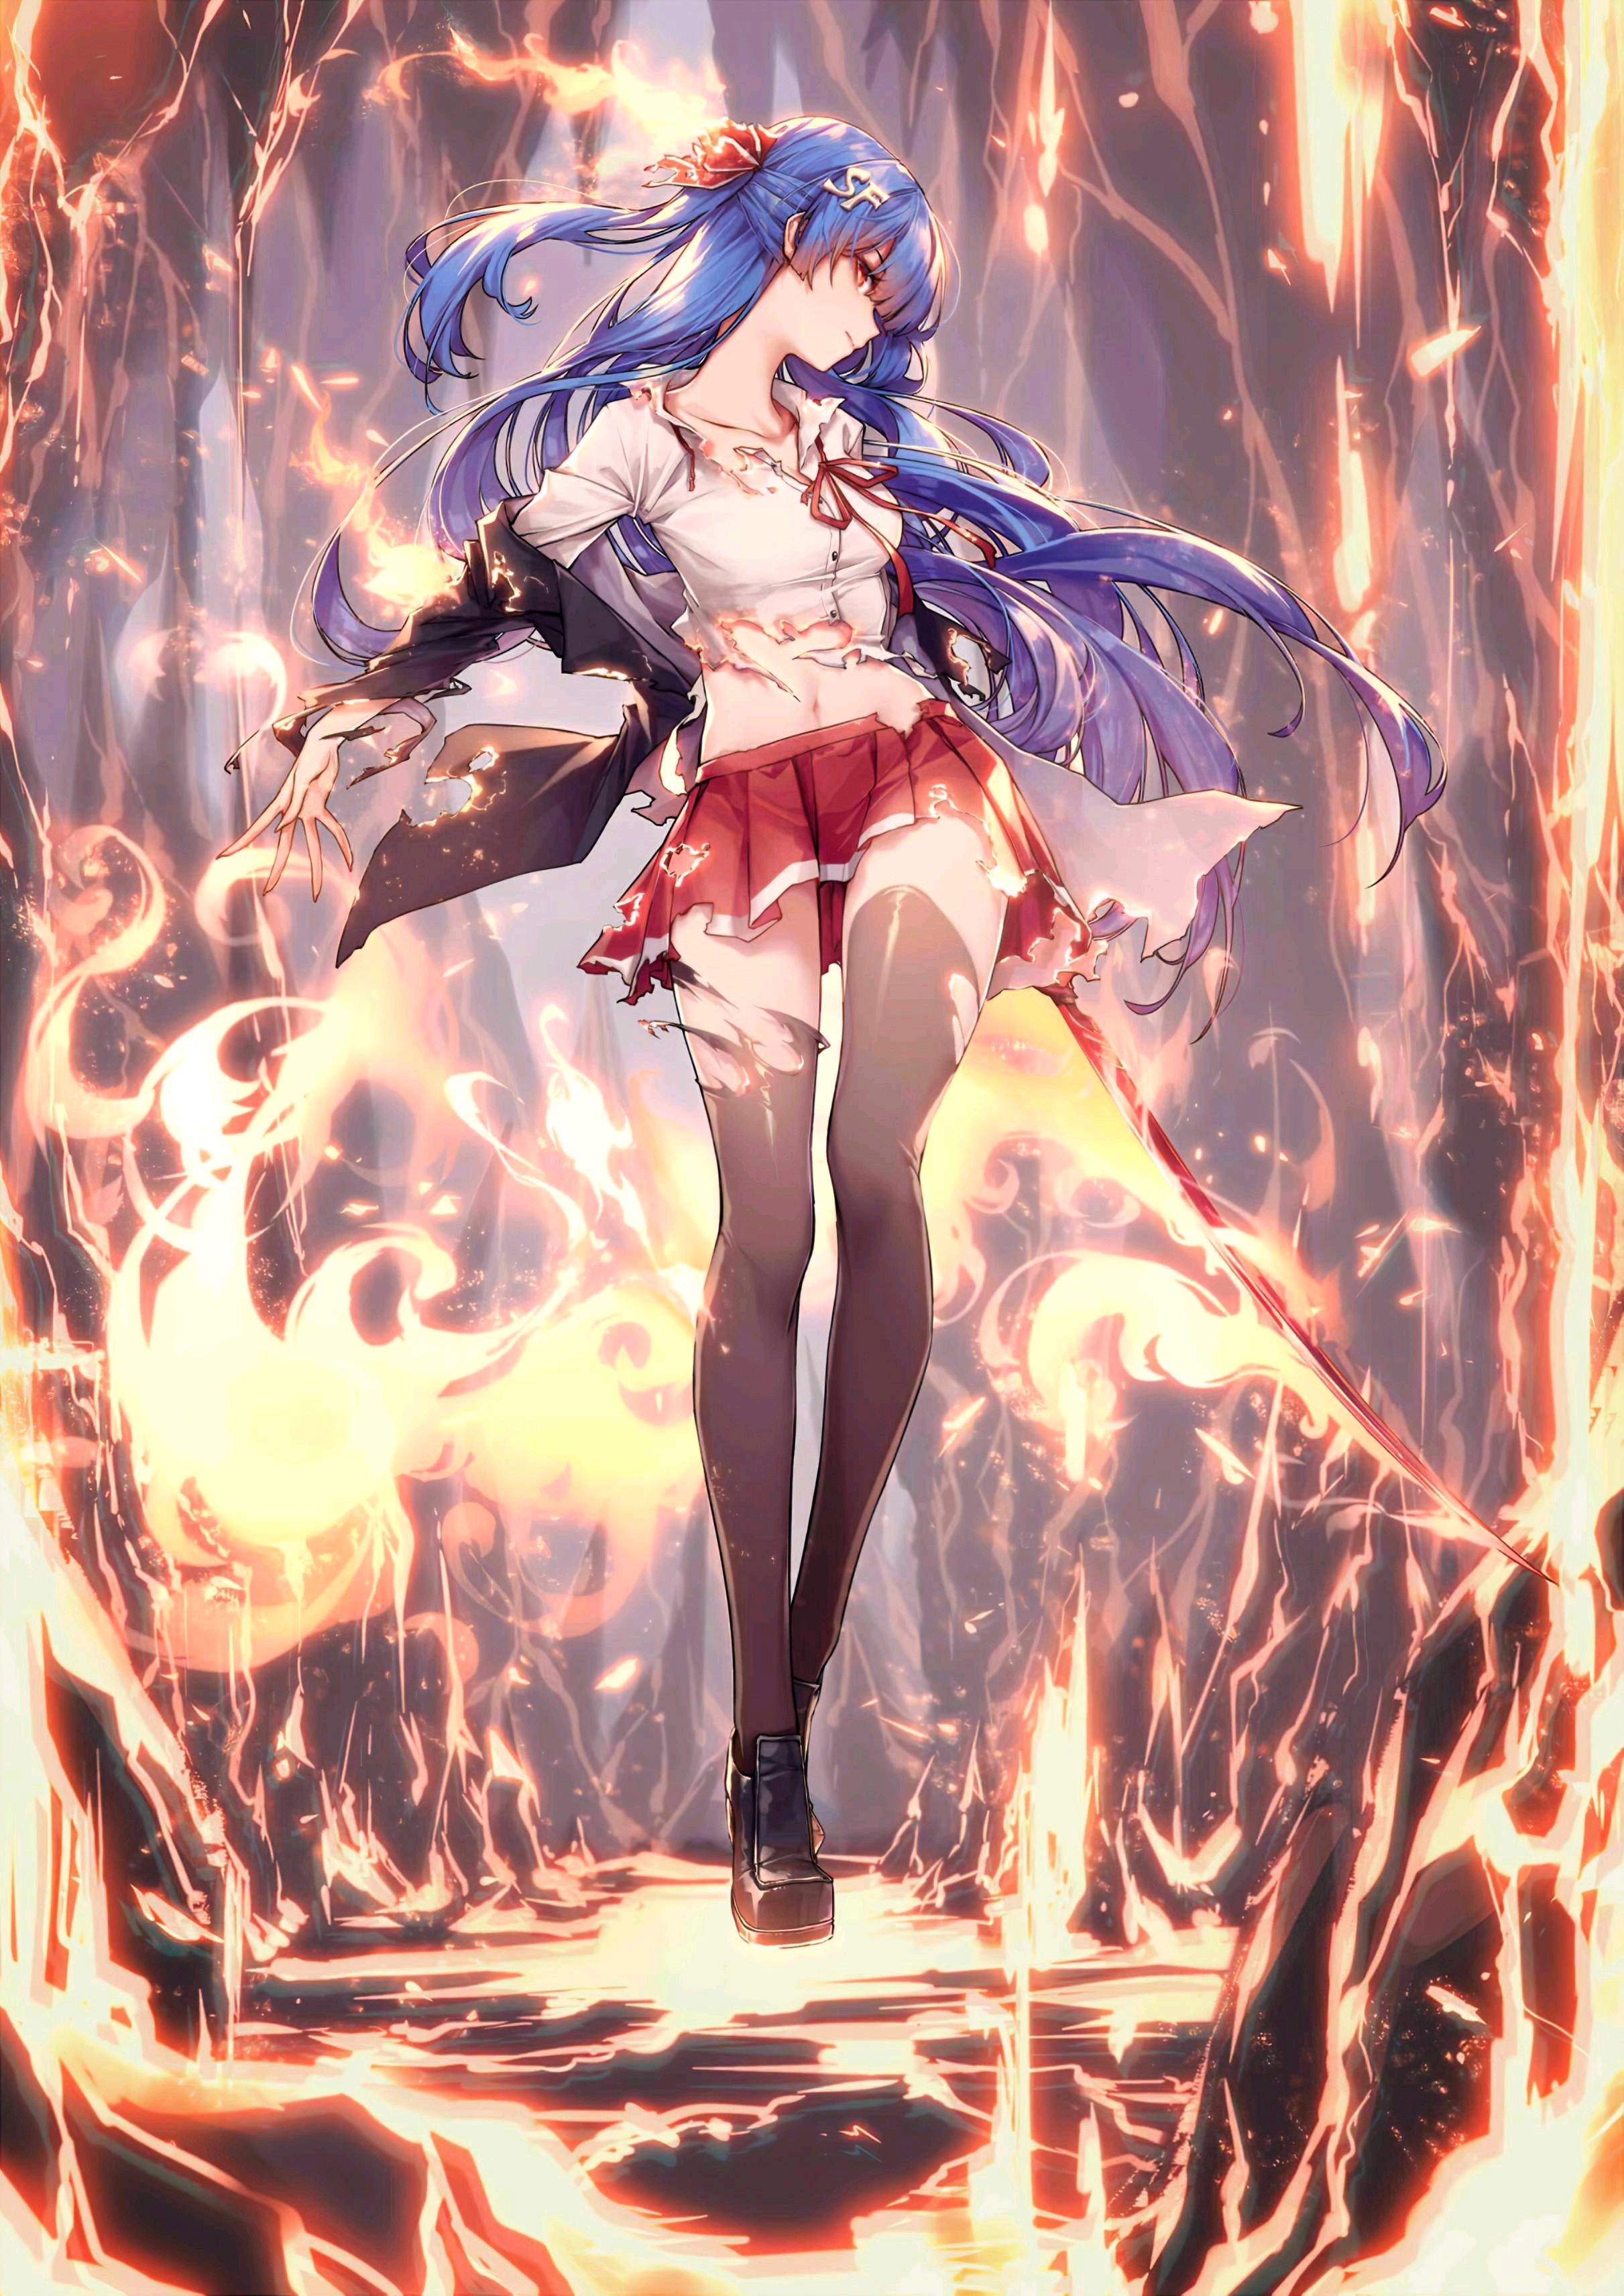 Magic Anime Anime Girls Blue Hair Standing Girls With Swords Legs Long Hair Fire Red Eyes Ripped Clo 2422x3424